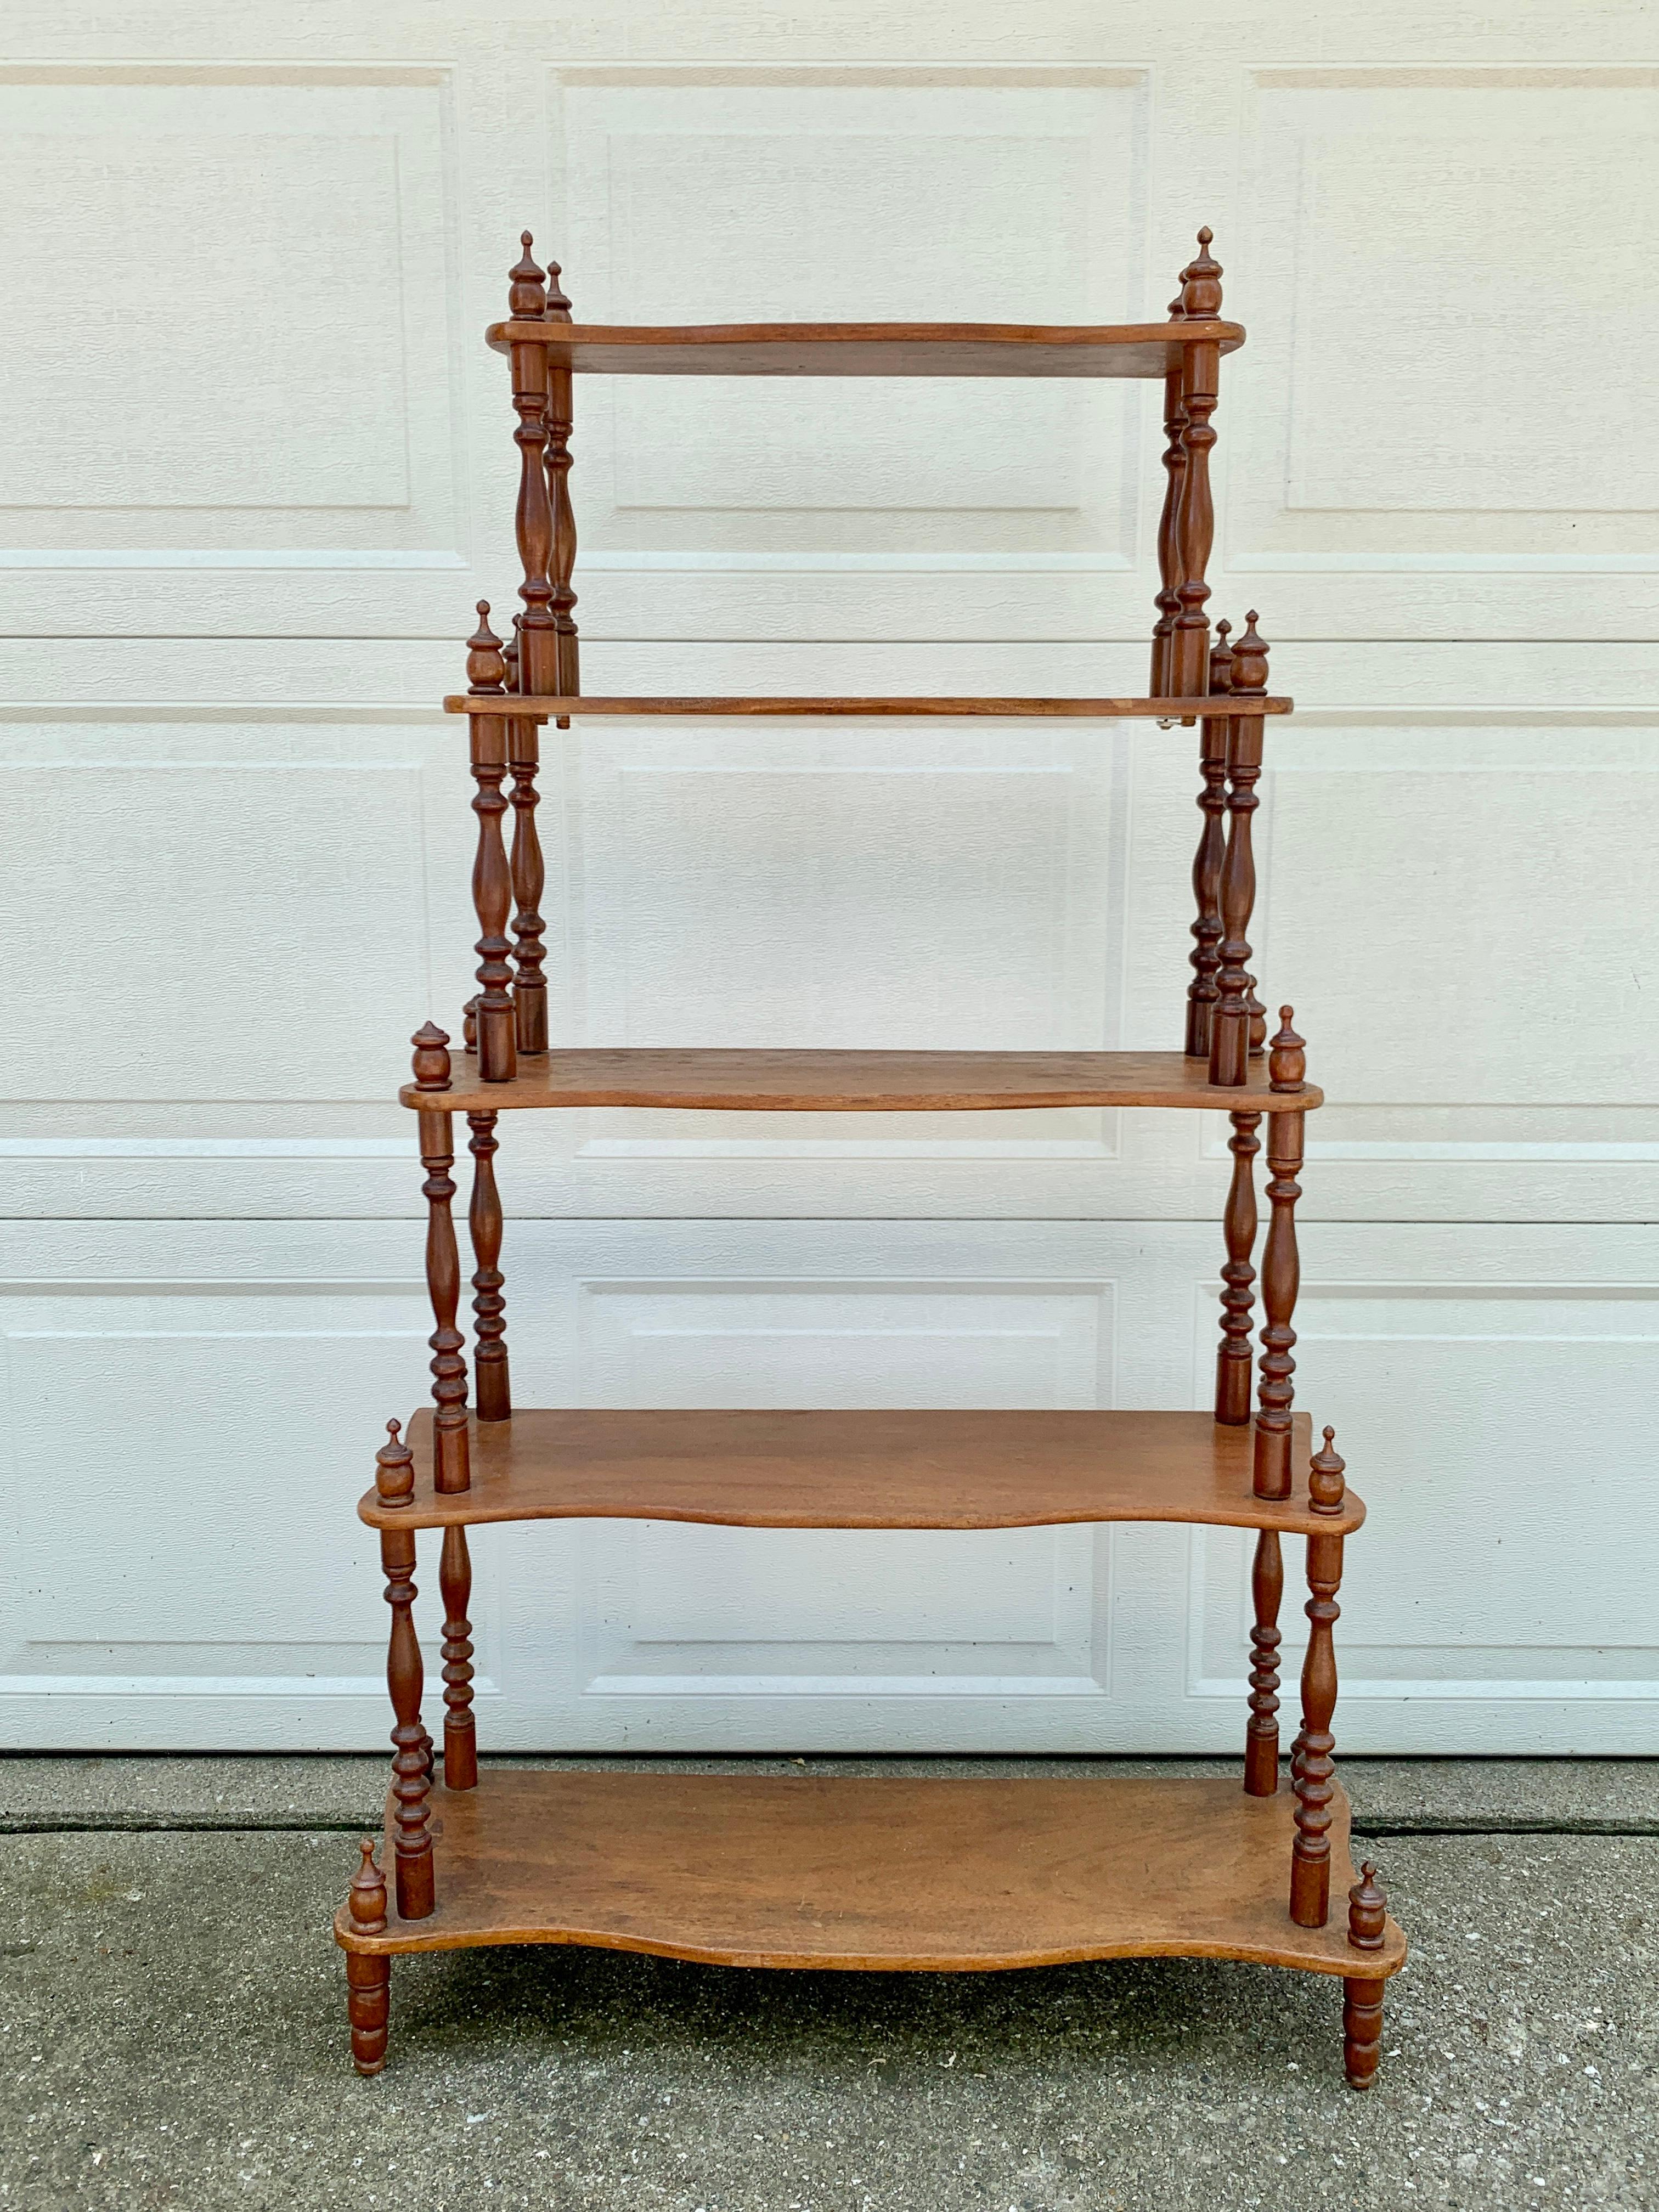 Antique American Victorian Cherry Wood Etagere or Bookshelf In Good Condition For Sale In Elkhart, IN